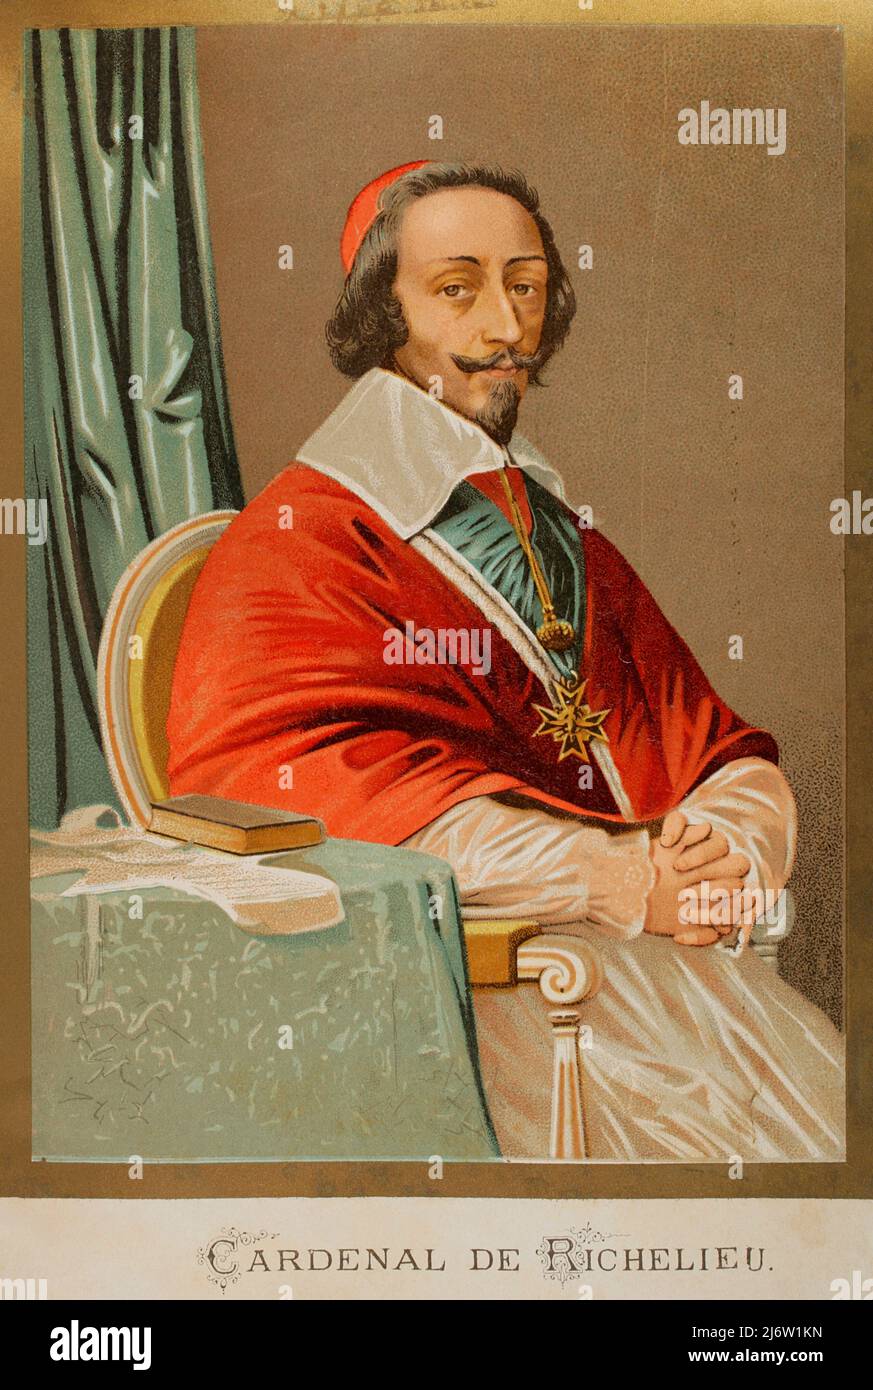 Cardinal de Richelieu (Armand Jean du Plessis) (1585-1642). French  clergyman and statesman. Chief minister to King Louis XIII. Portrait.  Chromolithography. Historia Universal, by César Cantú. Volume VIII.  Published in Barcelona, 1886 Stock